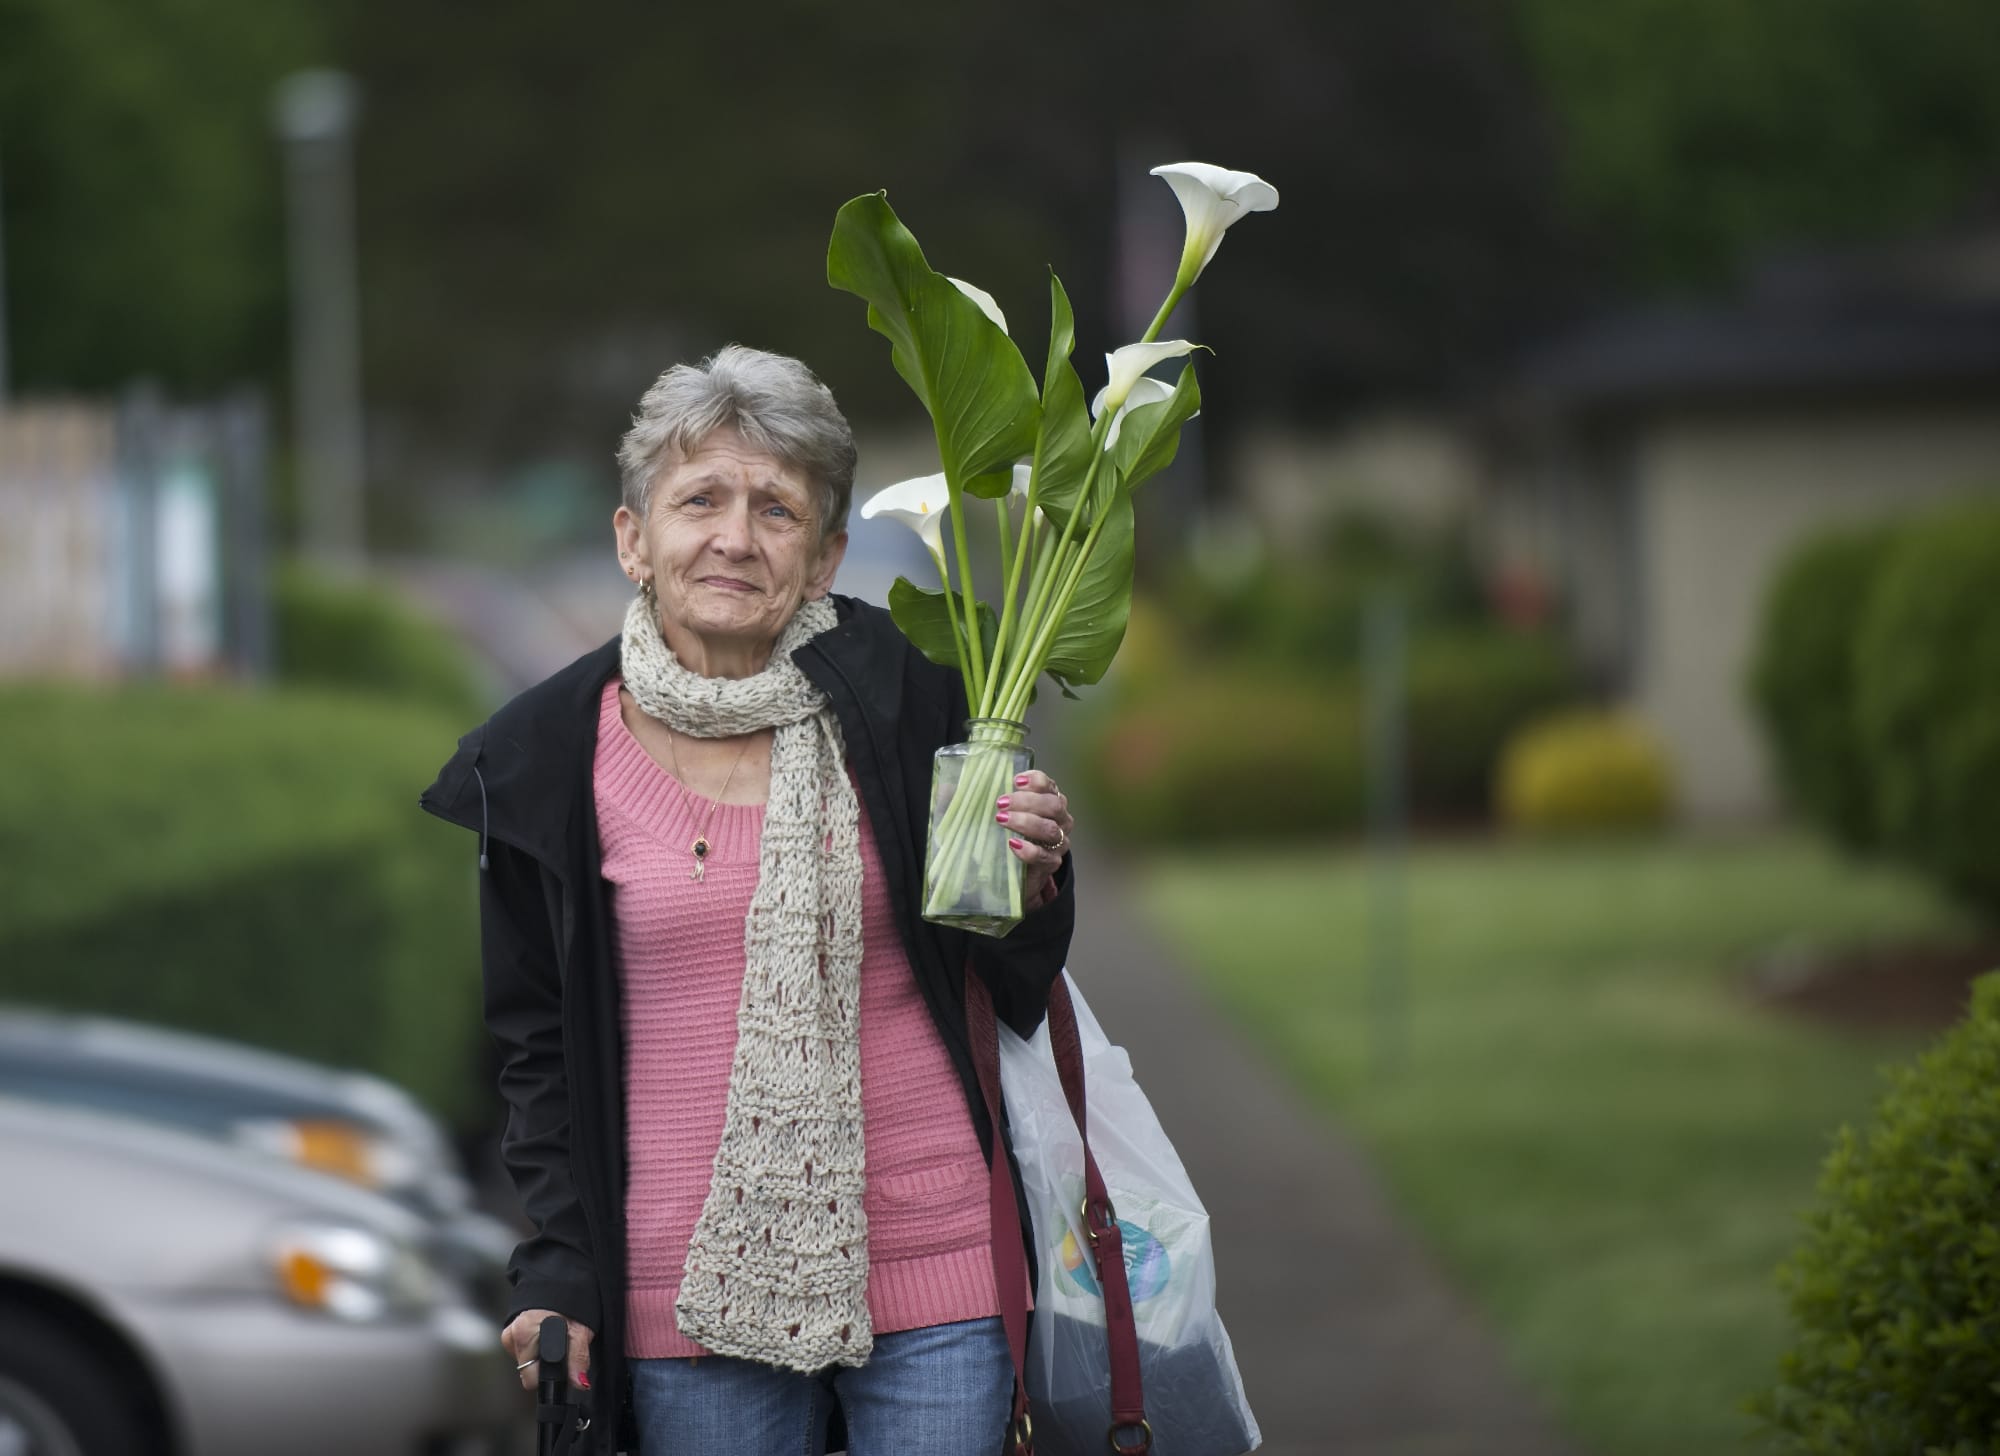 Mary Widerburg has lived in the Brandts apartments for 17 years, transferring her flower garden each time she's moved within the complex.